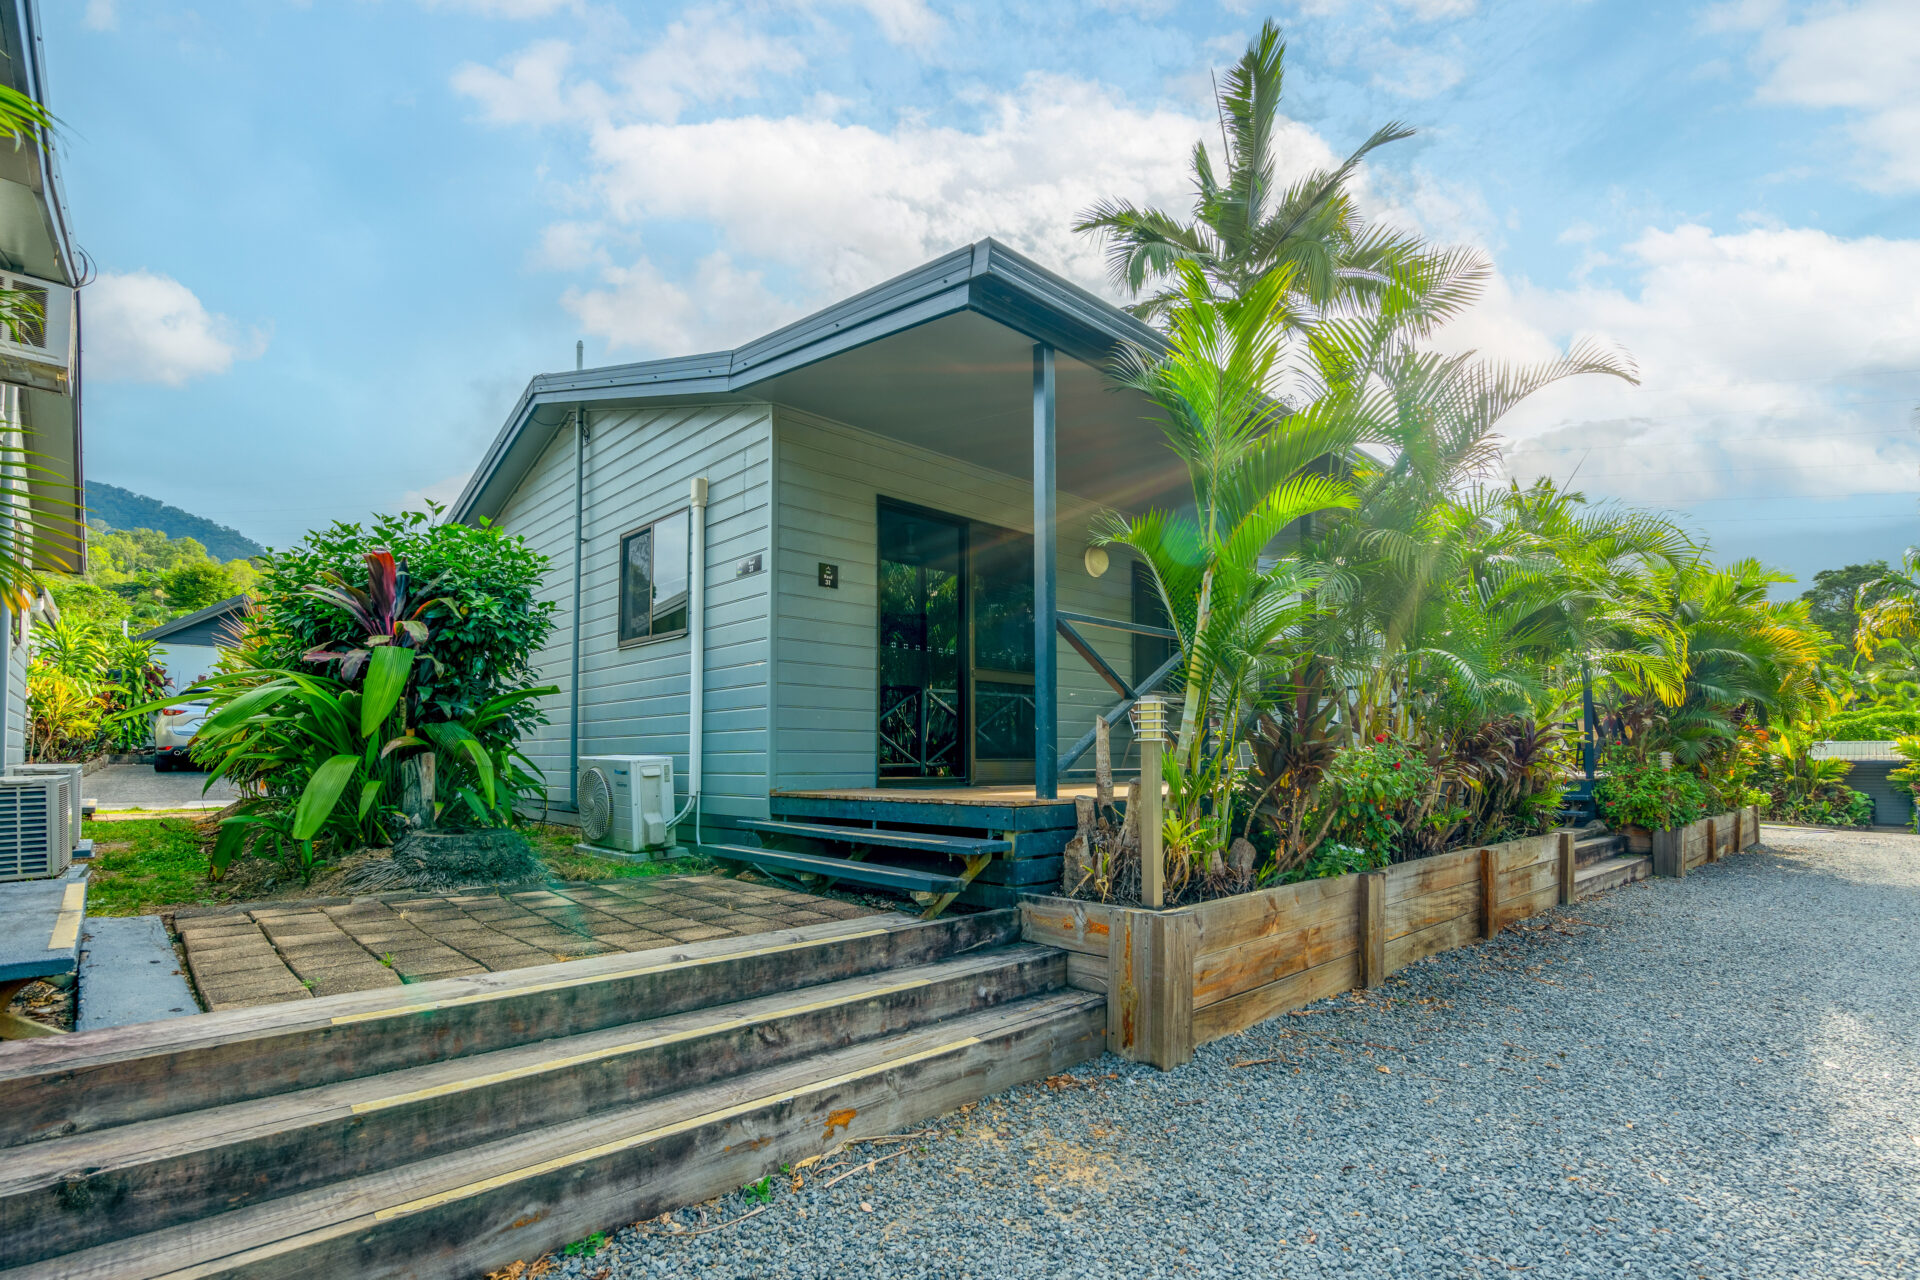 THP_CAIRNSCOOLWATERS_Stock_REEFCabin30 - DSC08469-HDR